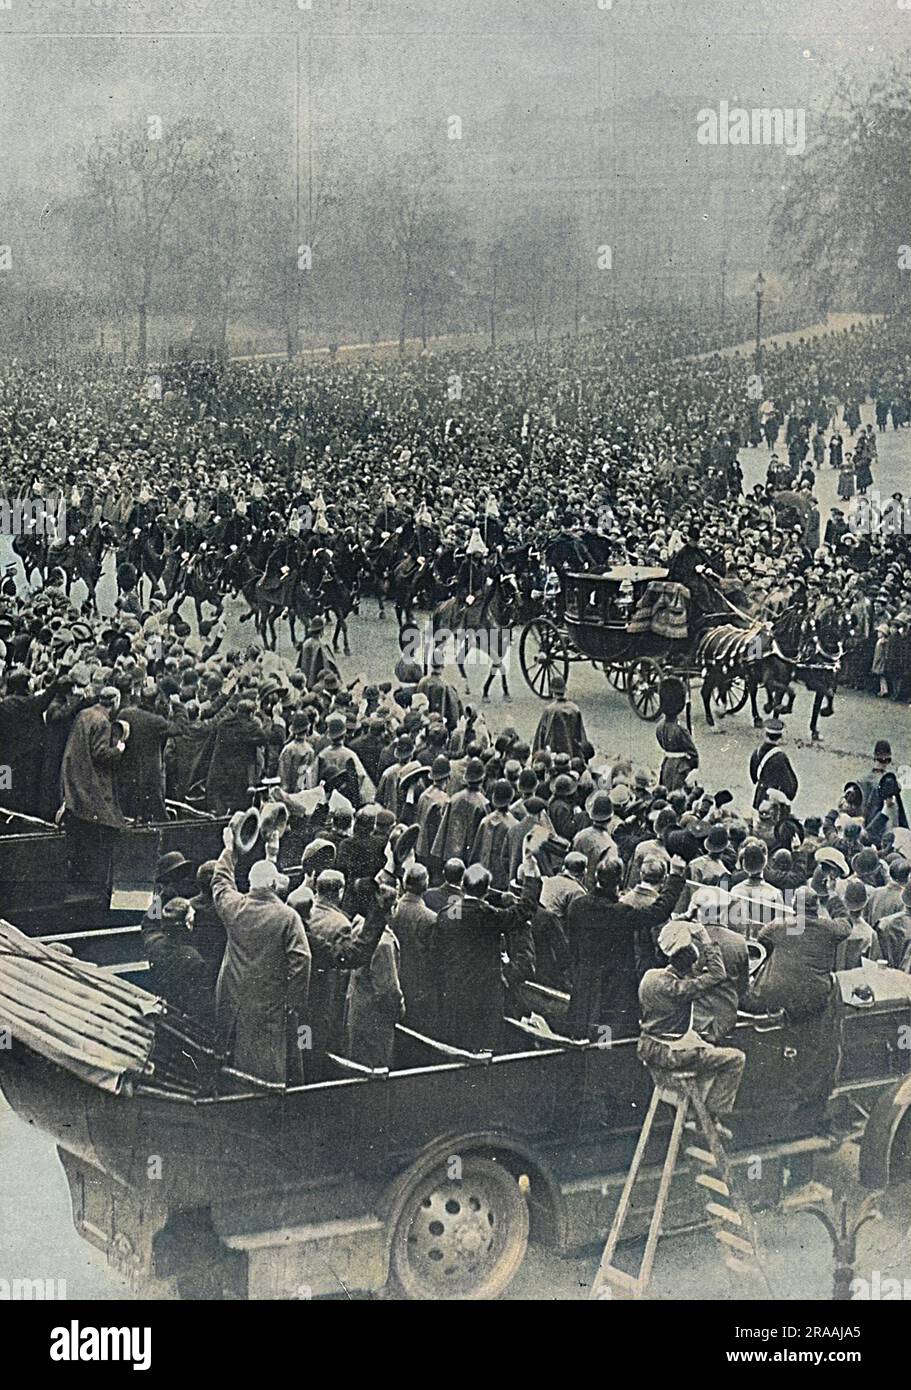 Vast crowds in Horse Guards' Parade watching the bridegroom, Prince Albert, Duke of York and his brothers, the Prince of Wales and Prince Henry (Duke of Gloucester) driving in procession to Westminster Abbey for the Duke of York's marriage to Lady Elizabeth Bowes-Lyon in April 1923.     Date: 1923 Stock Photo